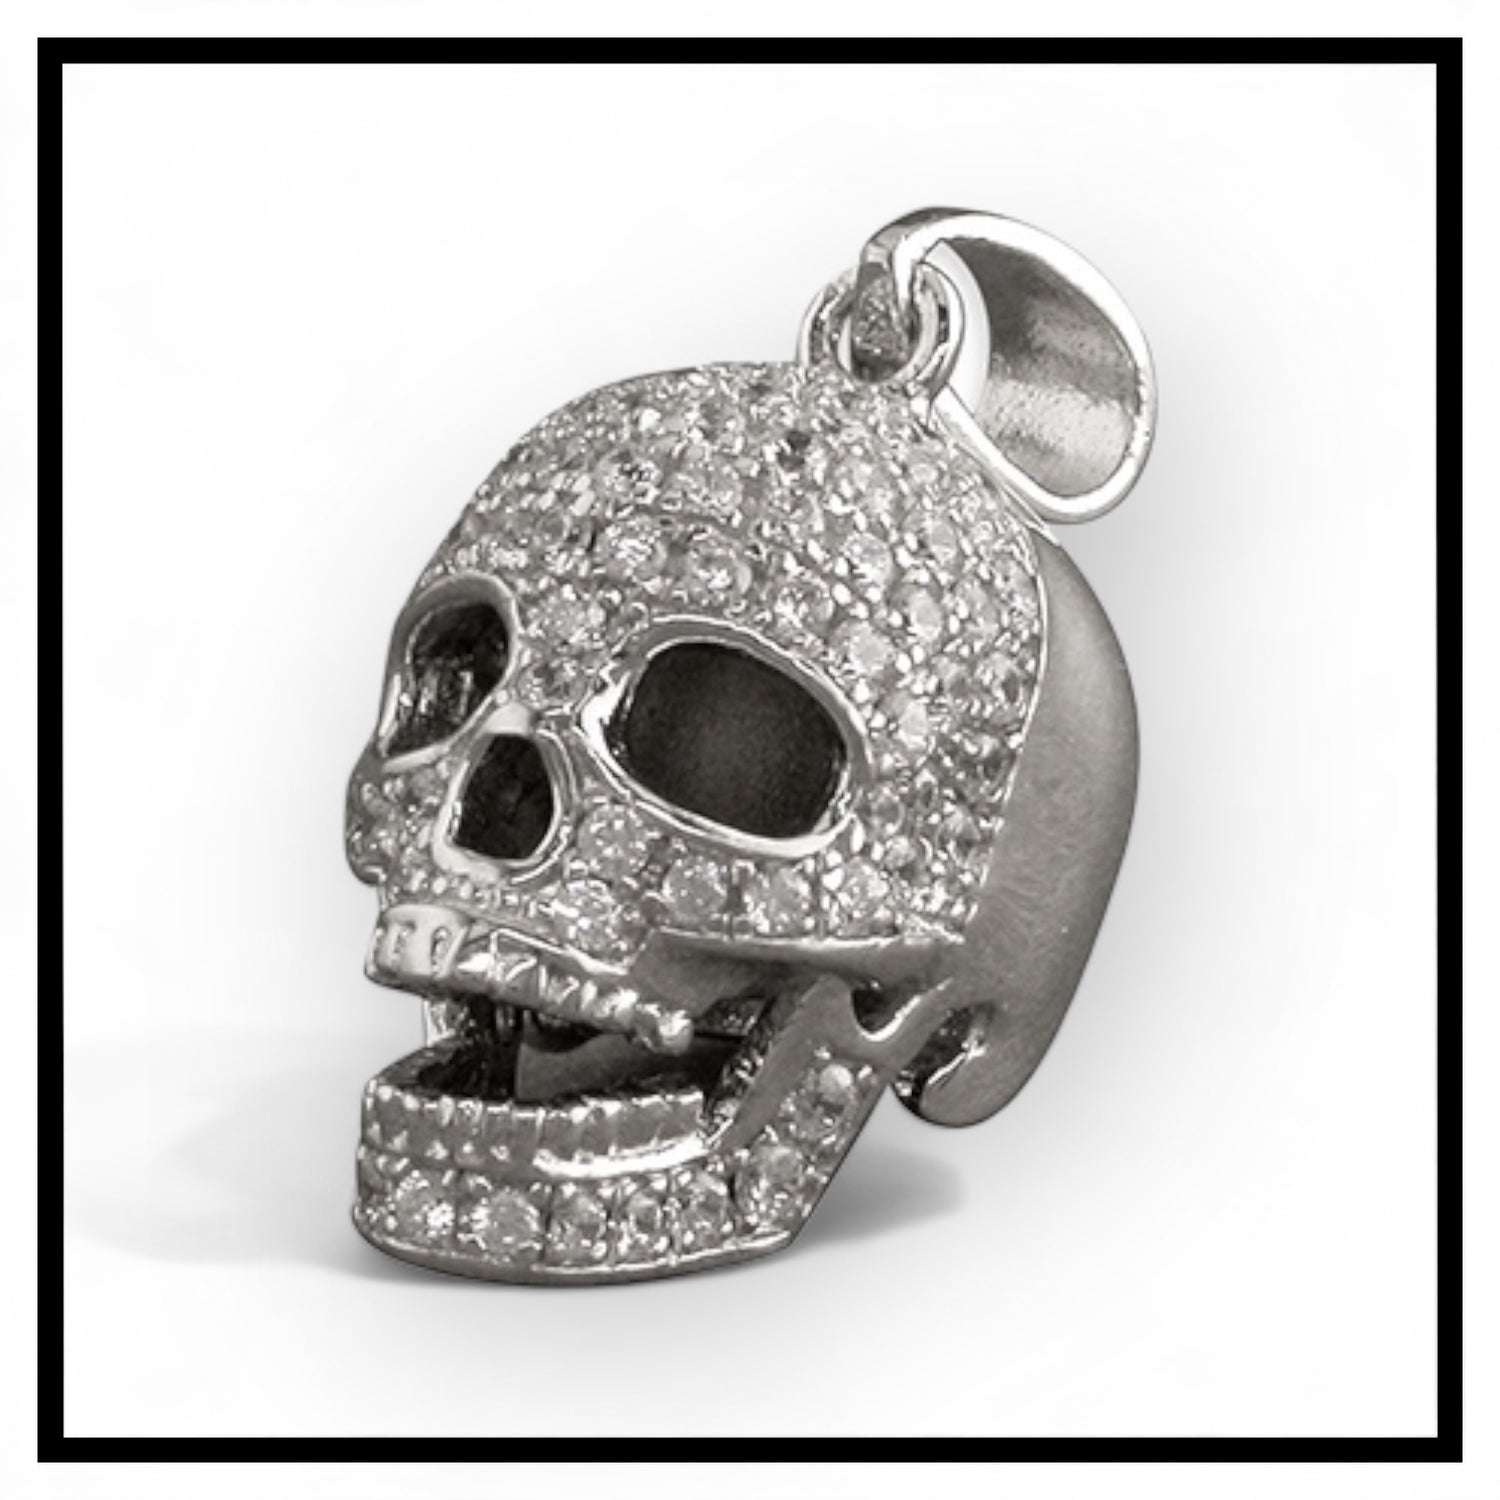 Crystal Skull Collection & 925 sterling silver jewellery collections at Twelve Silver Trees Jewellery & Gifts